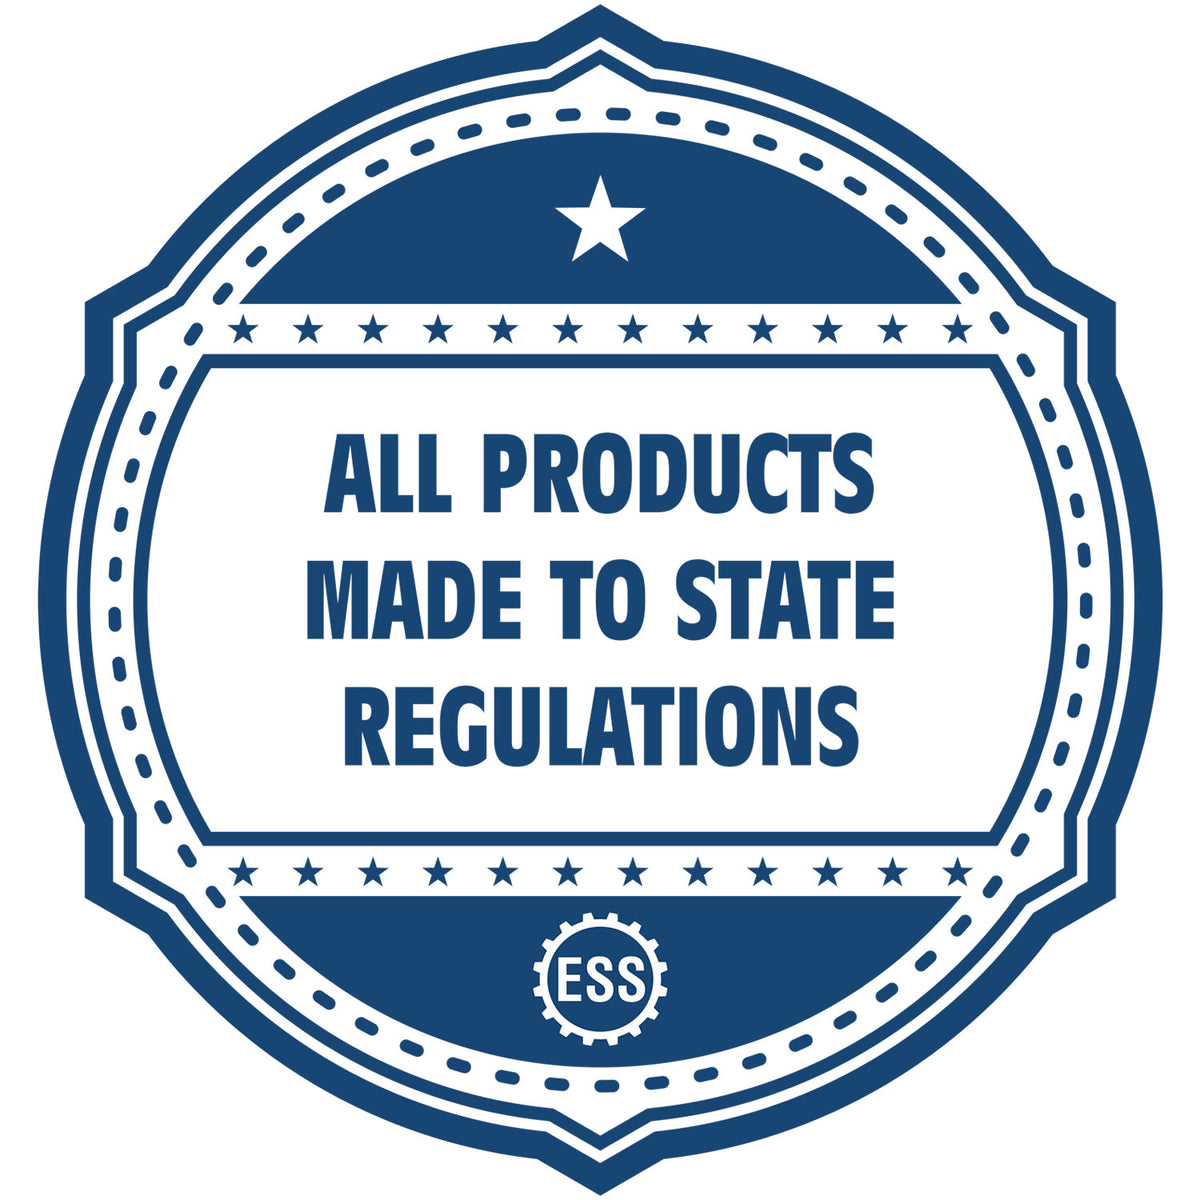 An icon or badge element for the State of Guam Long Reach Architectural Embossing Seal showing that this product is made in compliance with state regulations.